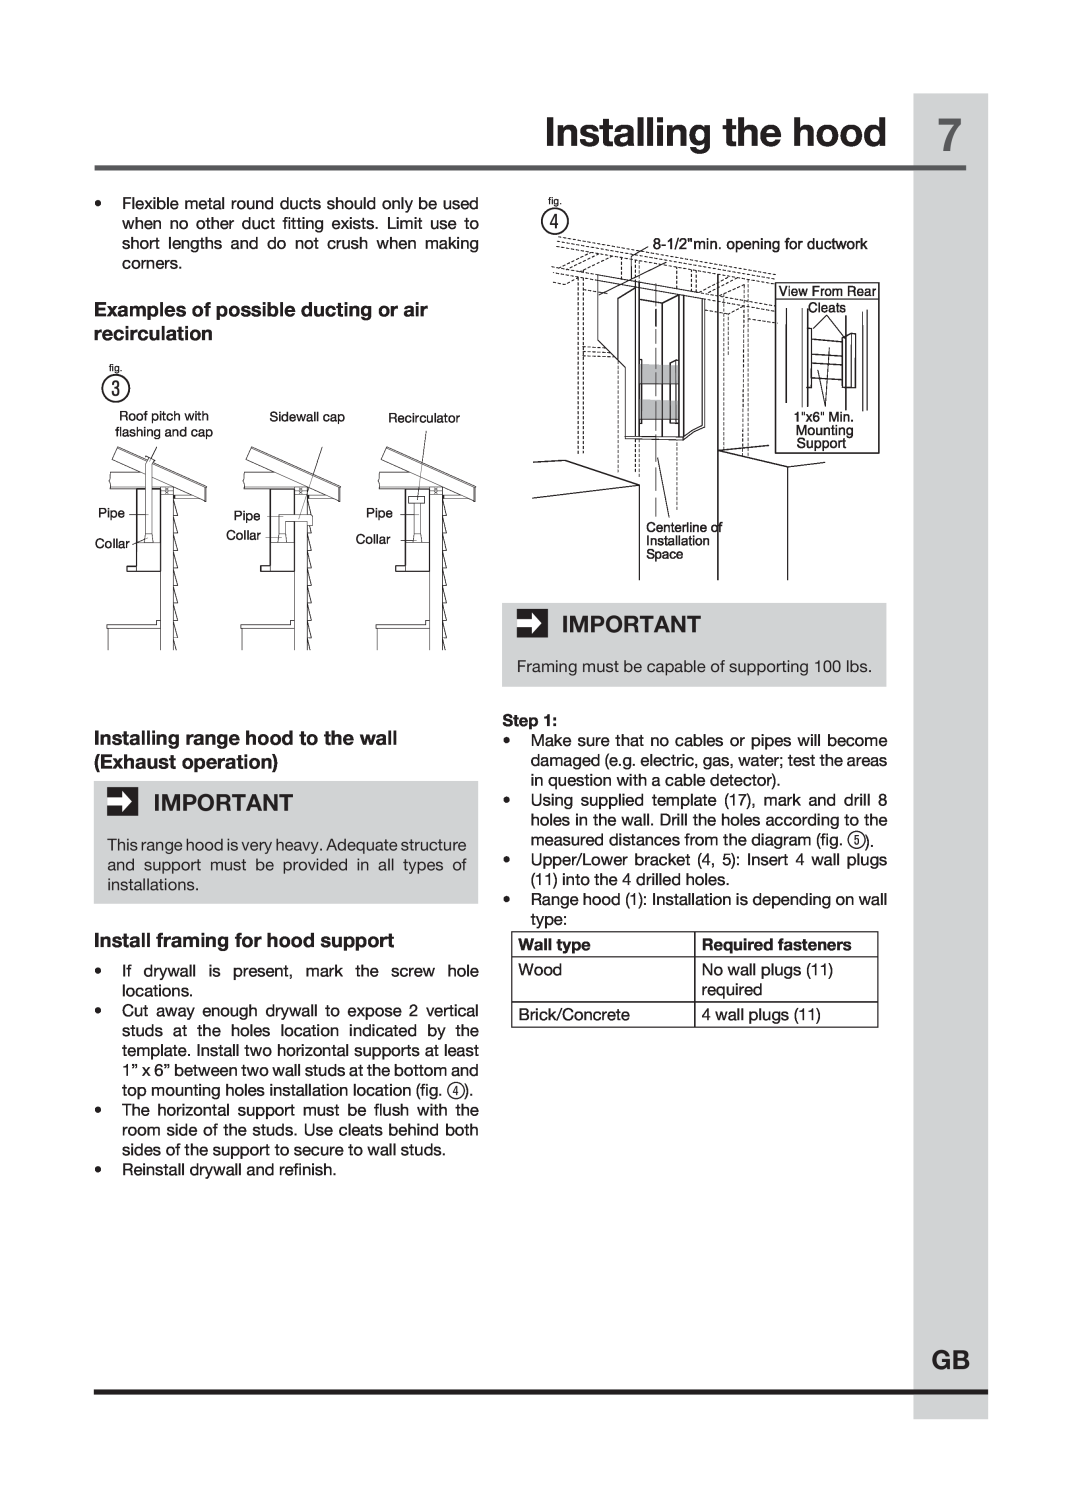 Frigidaire FHWC3655LS, FHWC3660LS Examples of possible ducting or air, recirculation, Install framing for hood support 